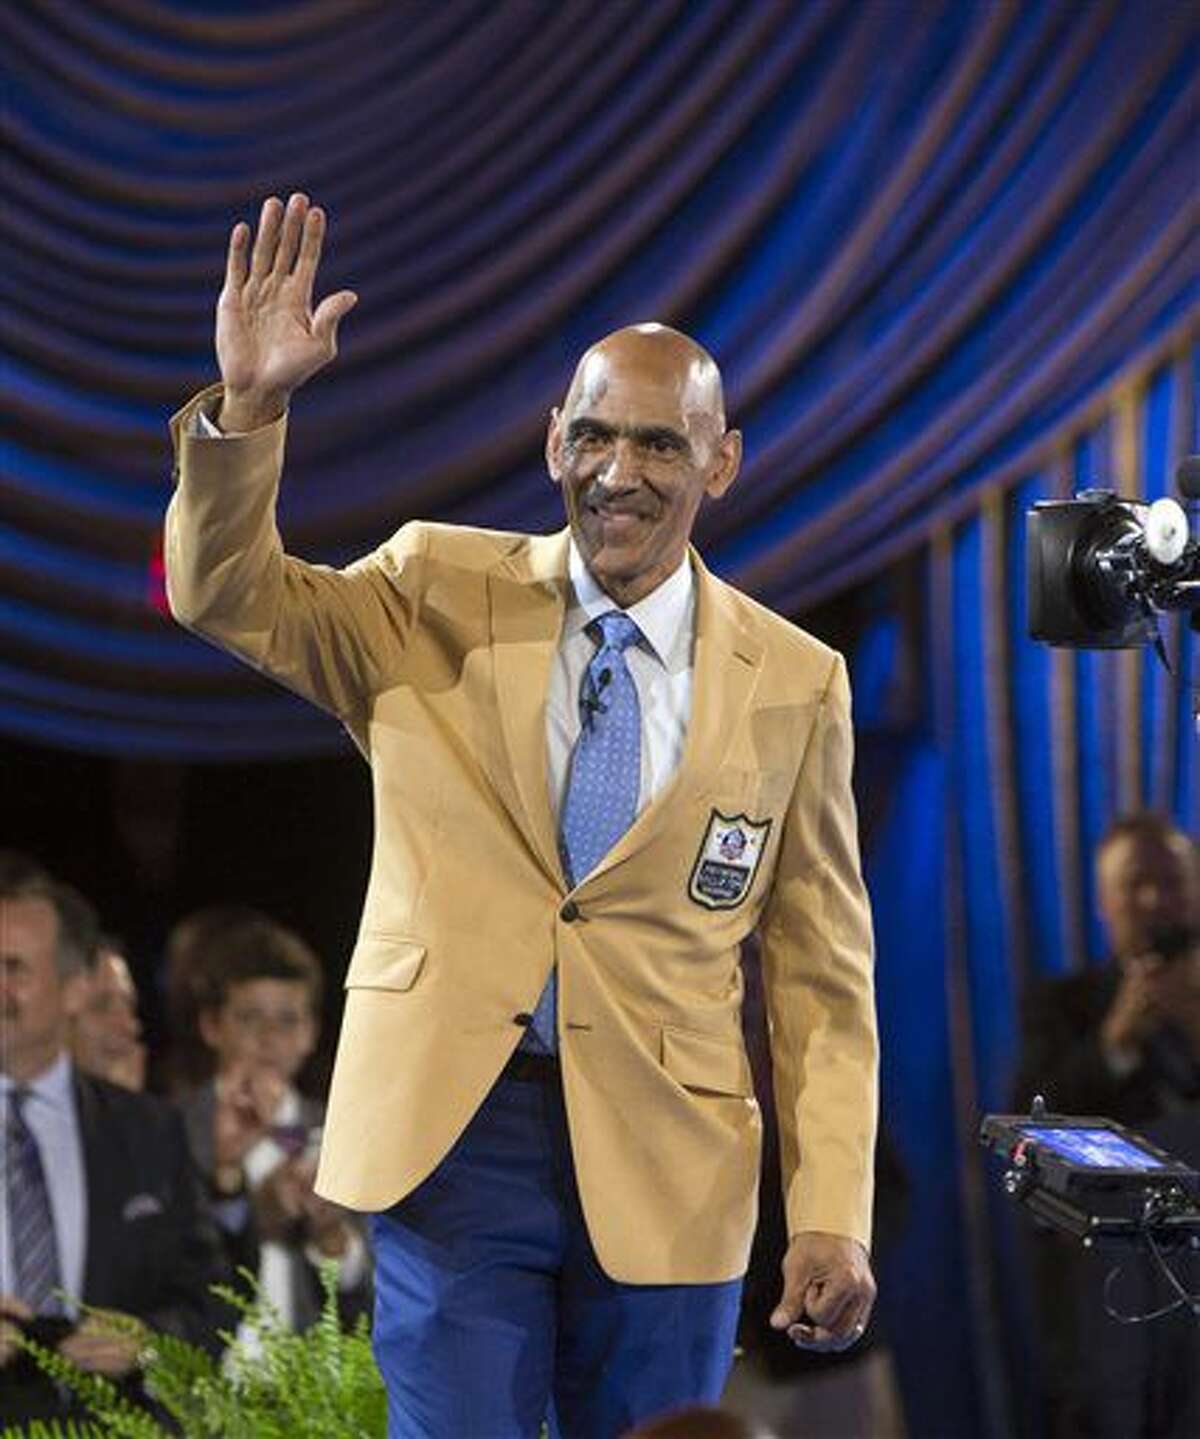 Tony Dungy waves after he received his gold jacket at the Pro Football Hall of Fame enshrinees' dinner, Thursday, Aug. 4, 2016, in Canton, Ohio. (Scott Heckel/The Repository via AP)